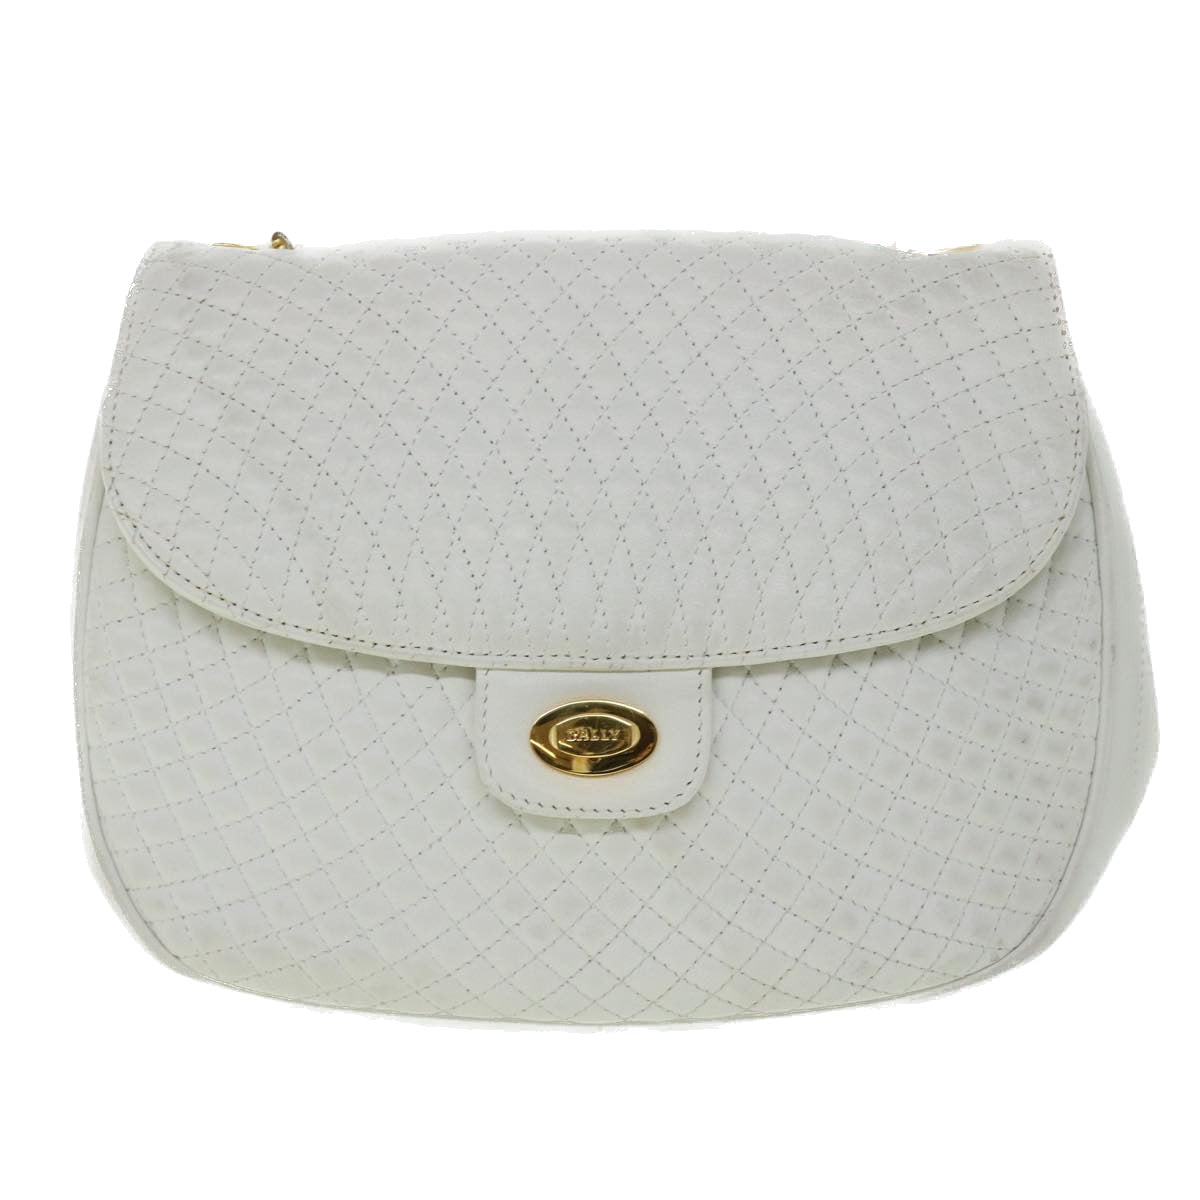 BALLY Quilted Chain Shoulder Bag Leather White Auth bs7943 - 0